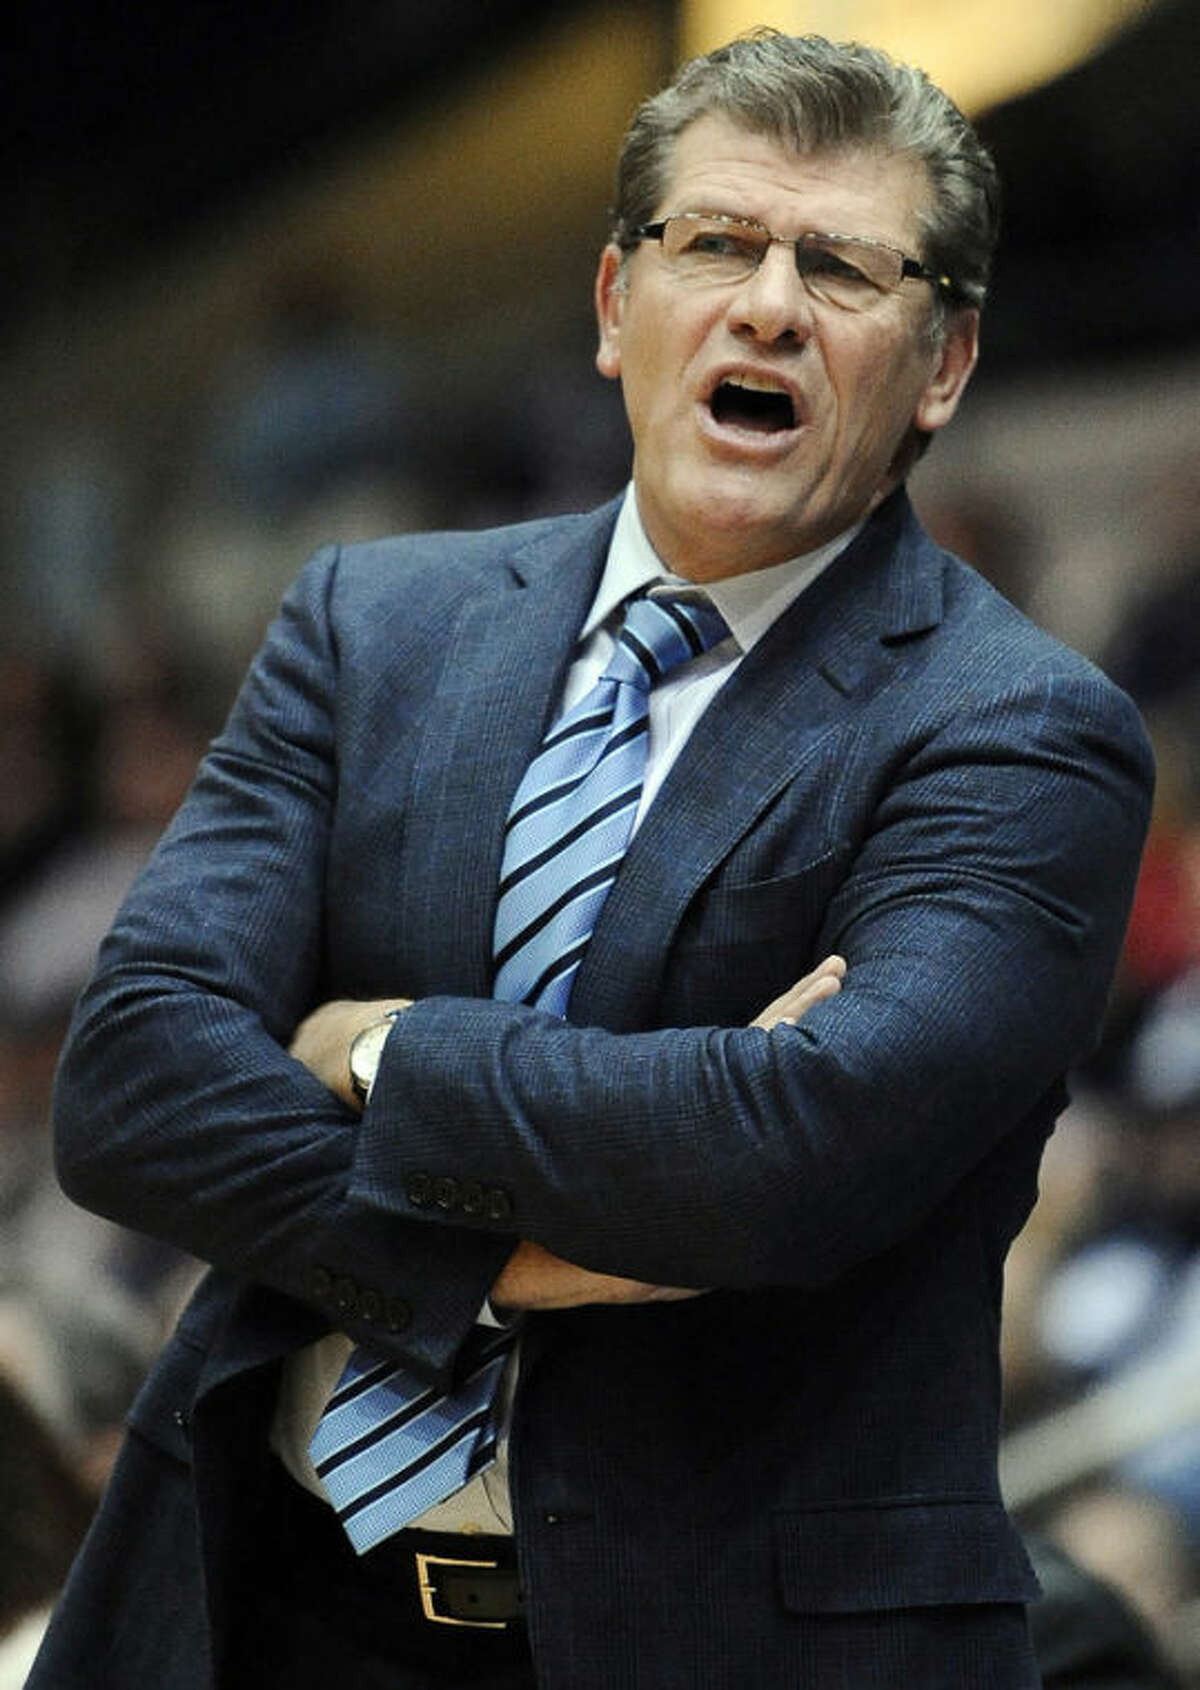 Connecticut head coach Geno Auriemma stands during the second half of an NCAA college basketball game against Ohio State, Sunday, Dec. 1, 2013, in Springfield, Mass. Connecticut won 70-49. (AP Photo/Jessica Hill)